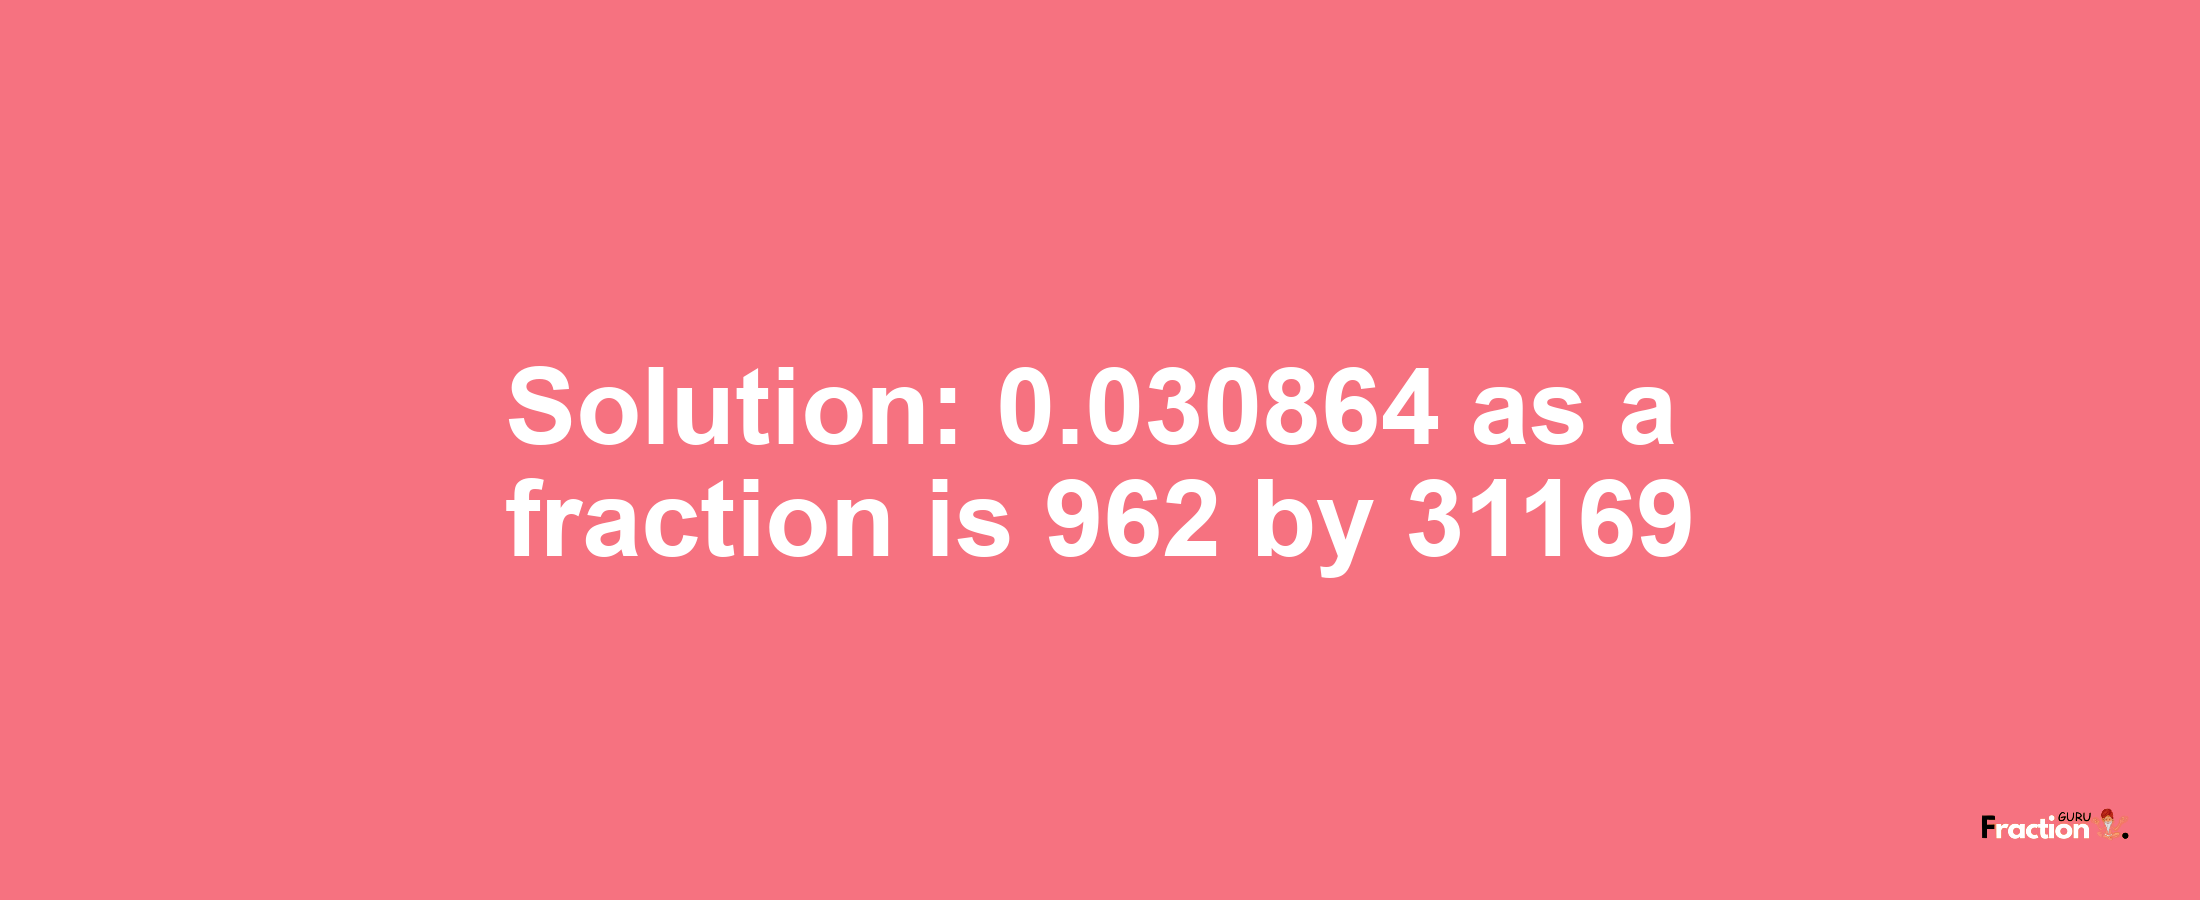 Solution:0.030864 as a fraction is 962/31169